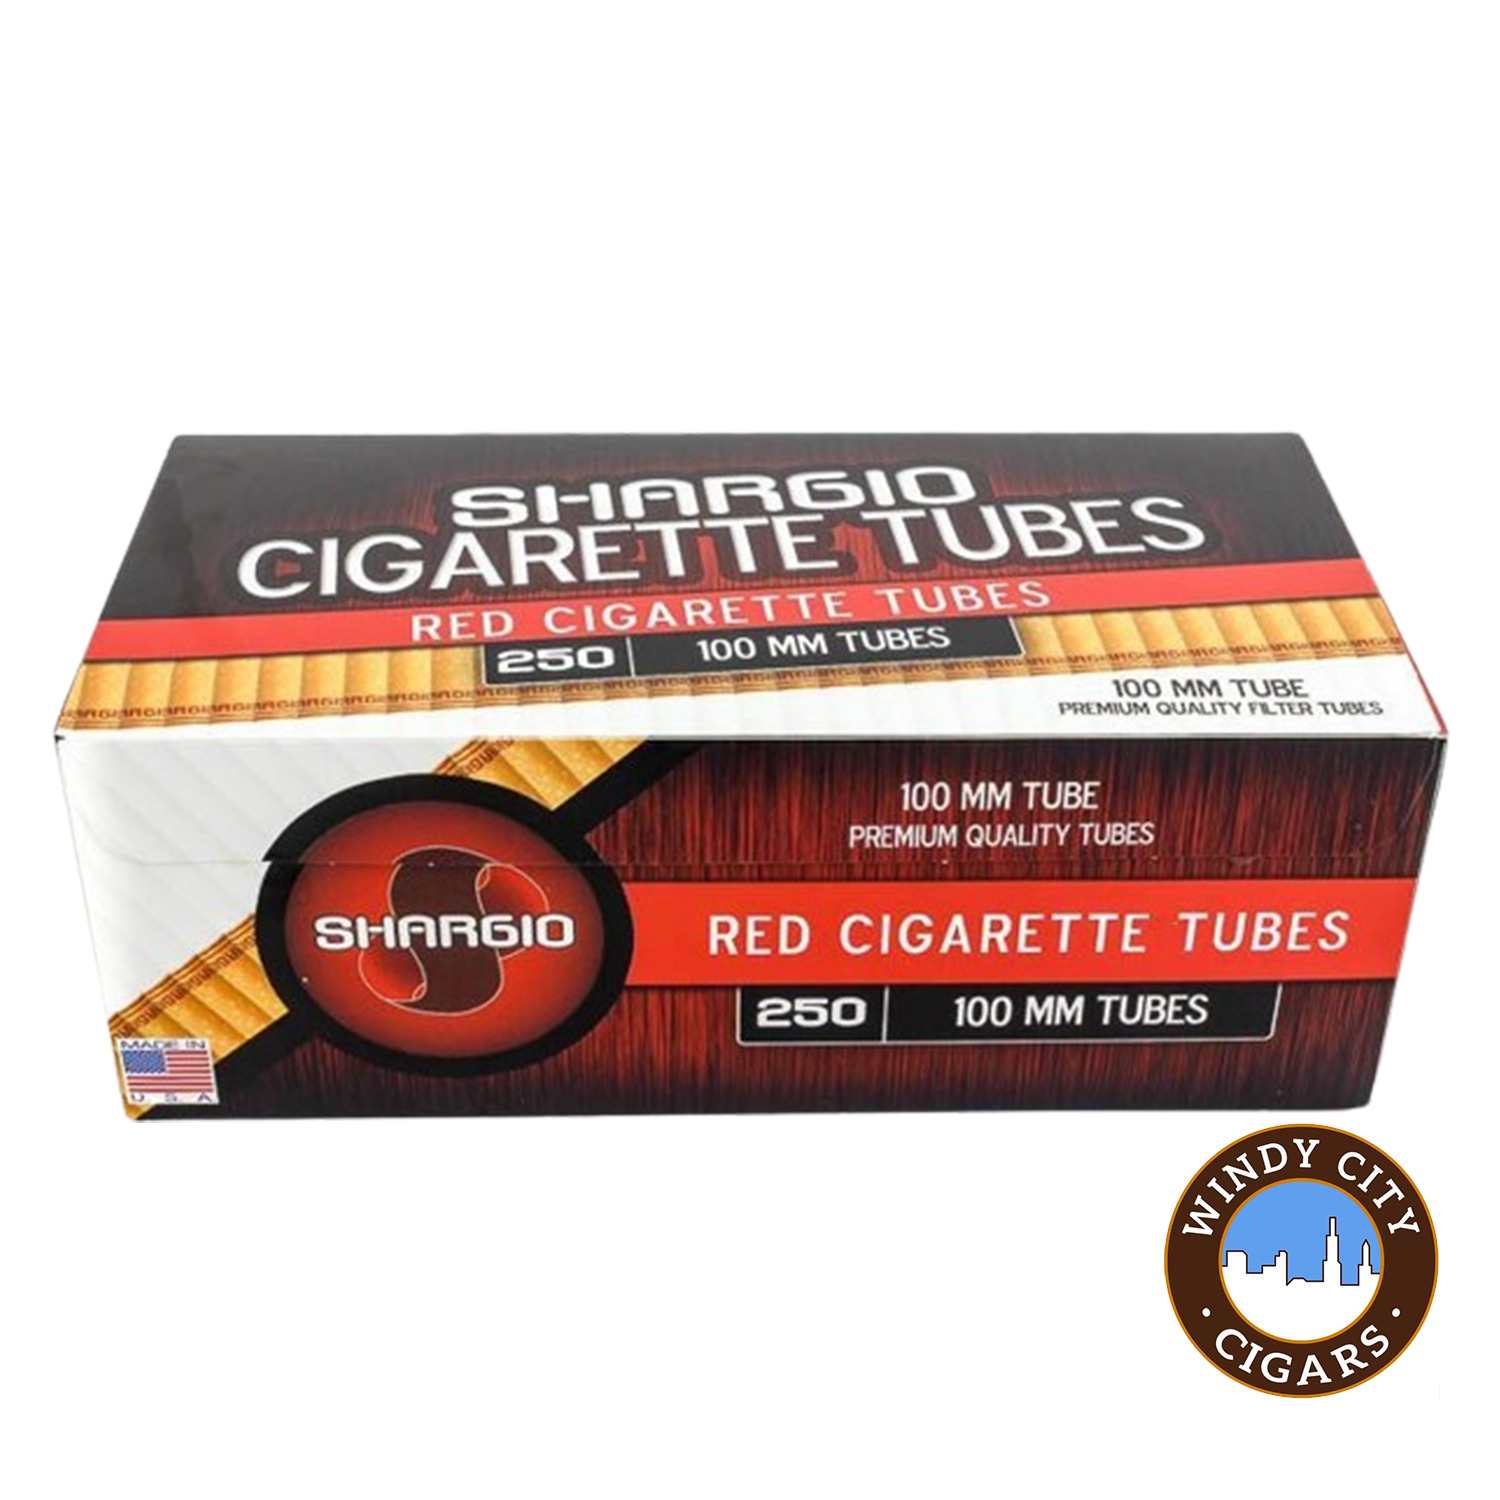 Shargio Red 100s Cigarette 250ct Tubes - 4 Boxes